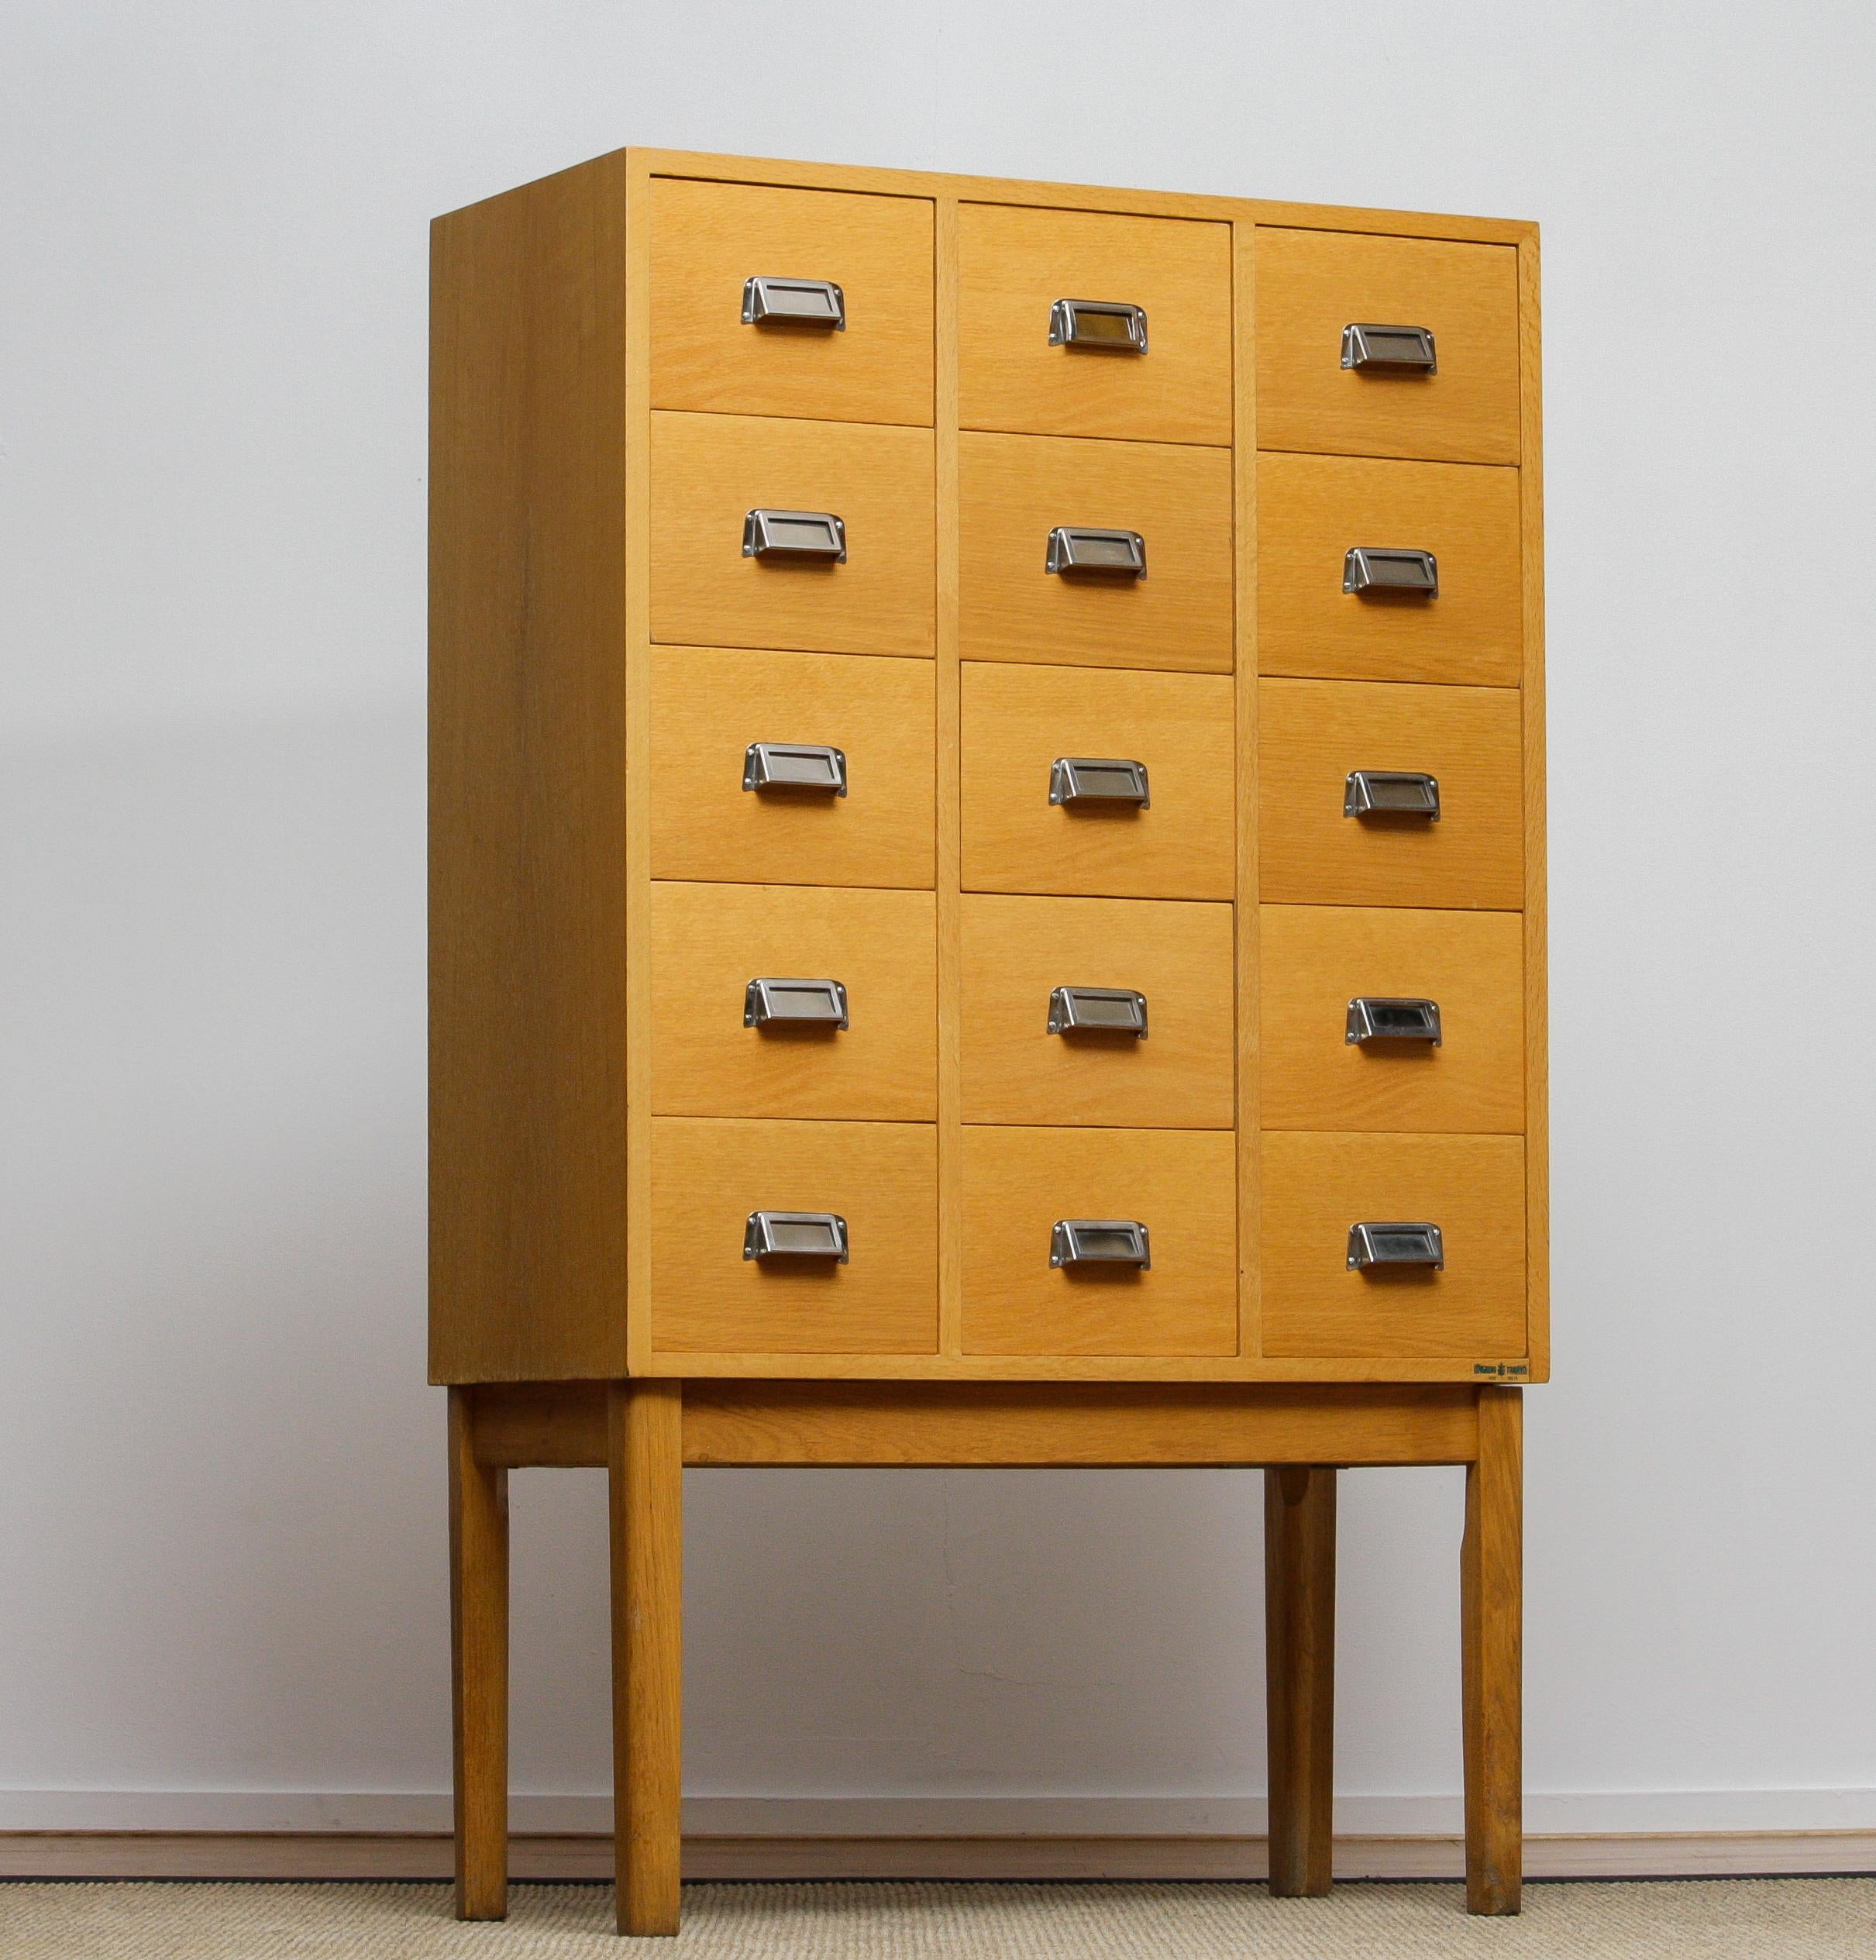 Beautiful and very decorative high legged oak drawer / filing cabinet by Lövgrens Sweden from the 1970s.
Fifteen beech drawers veneered in oak in, overall, good condition.